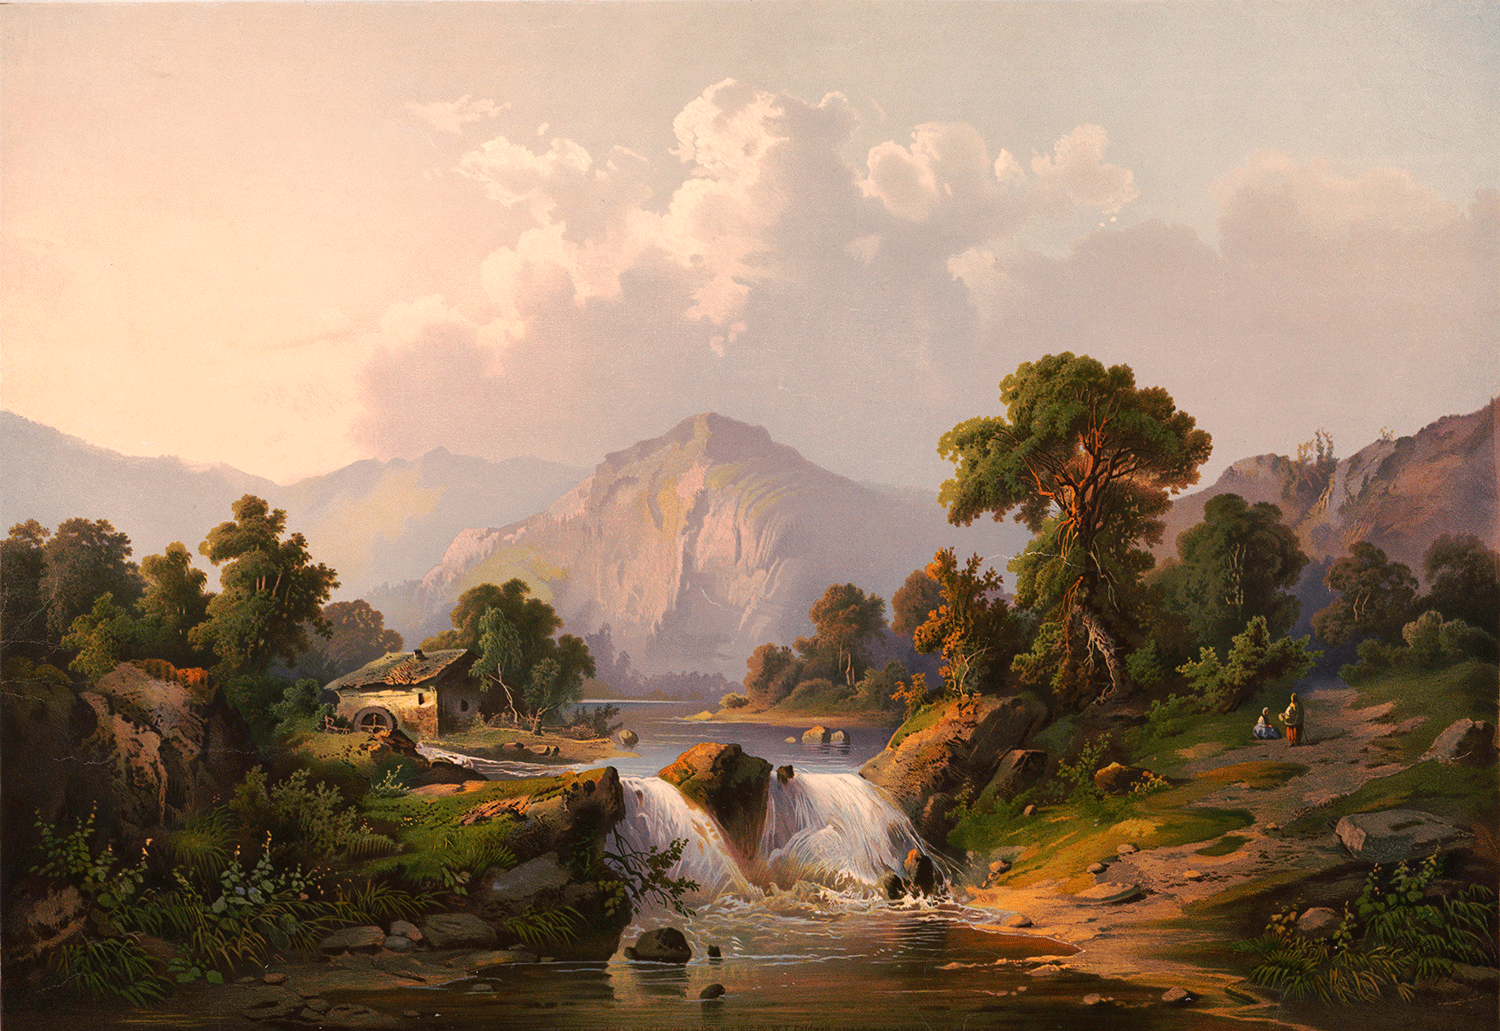 Scene in the Catskills. Caldwell & Co. Chromolithograph, c.1872. Library of Congress Prints and Photographs Division: 2018756891; 59122.